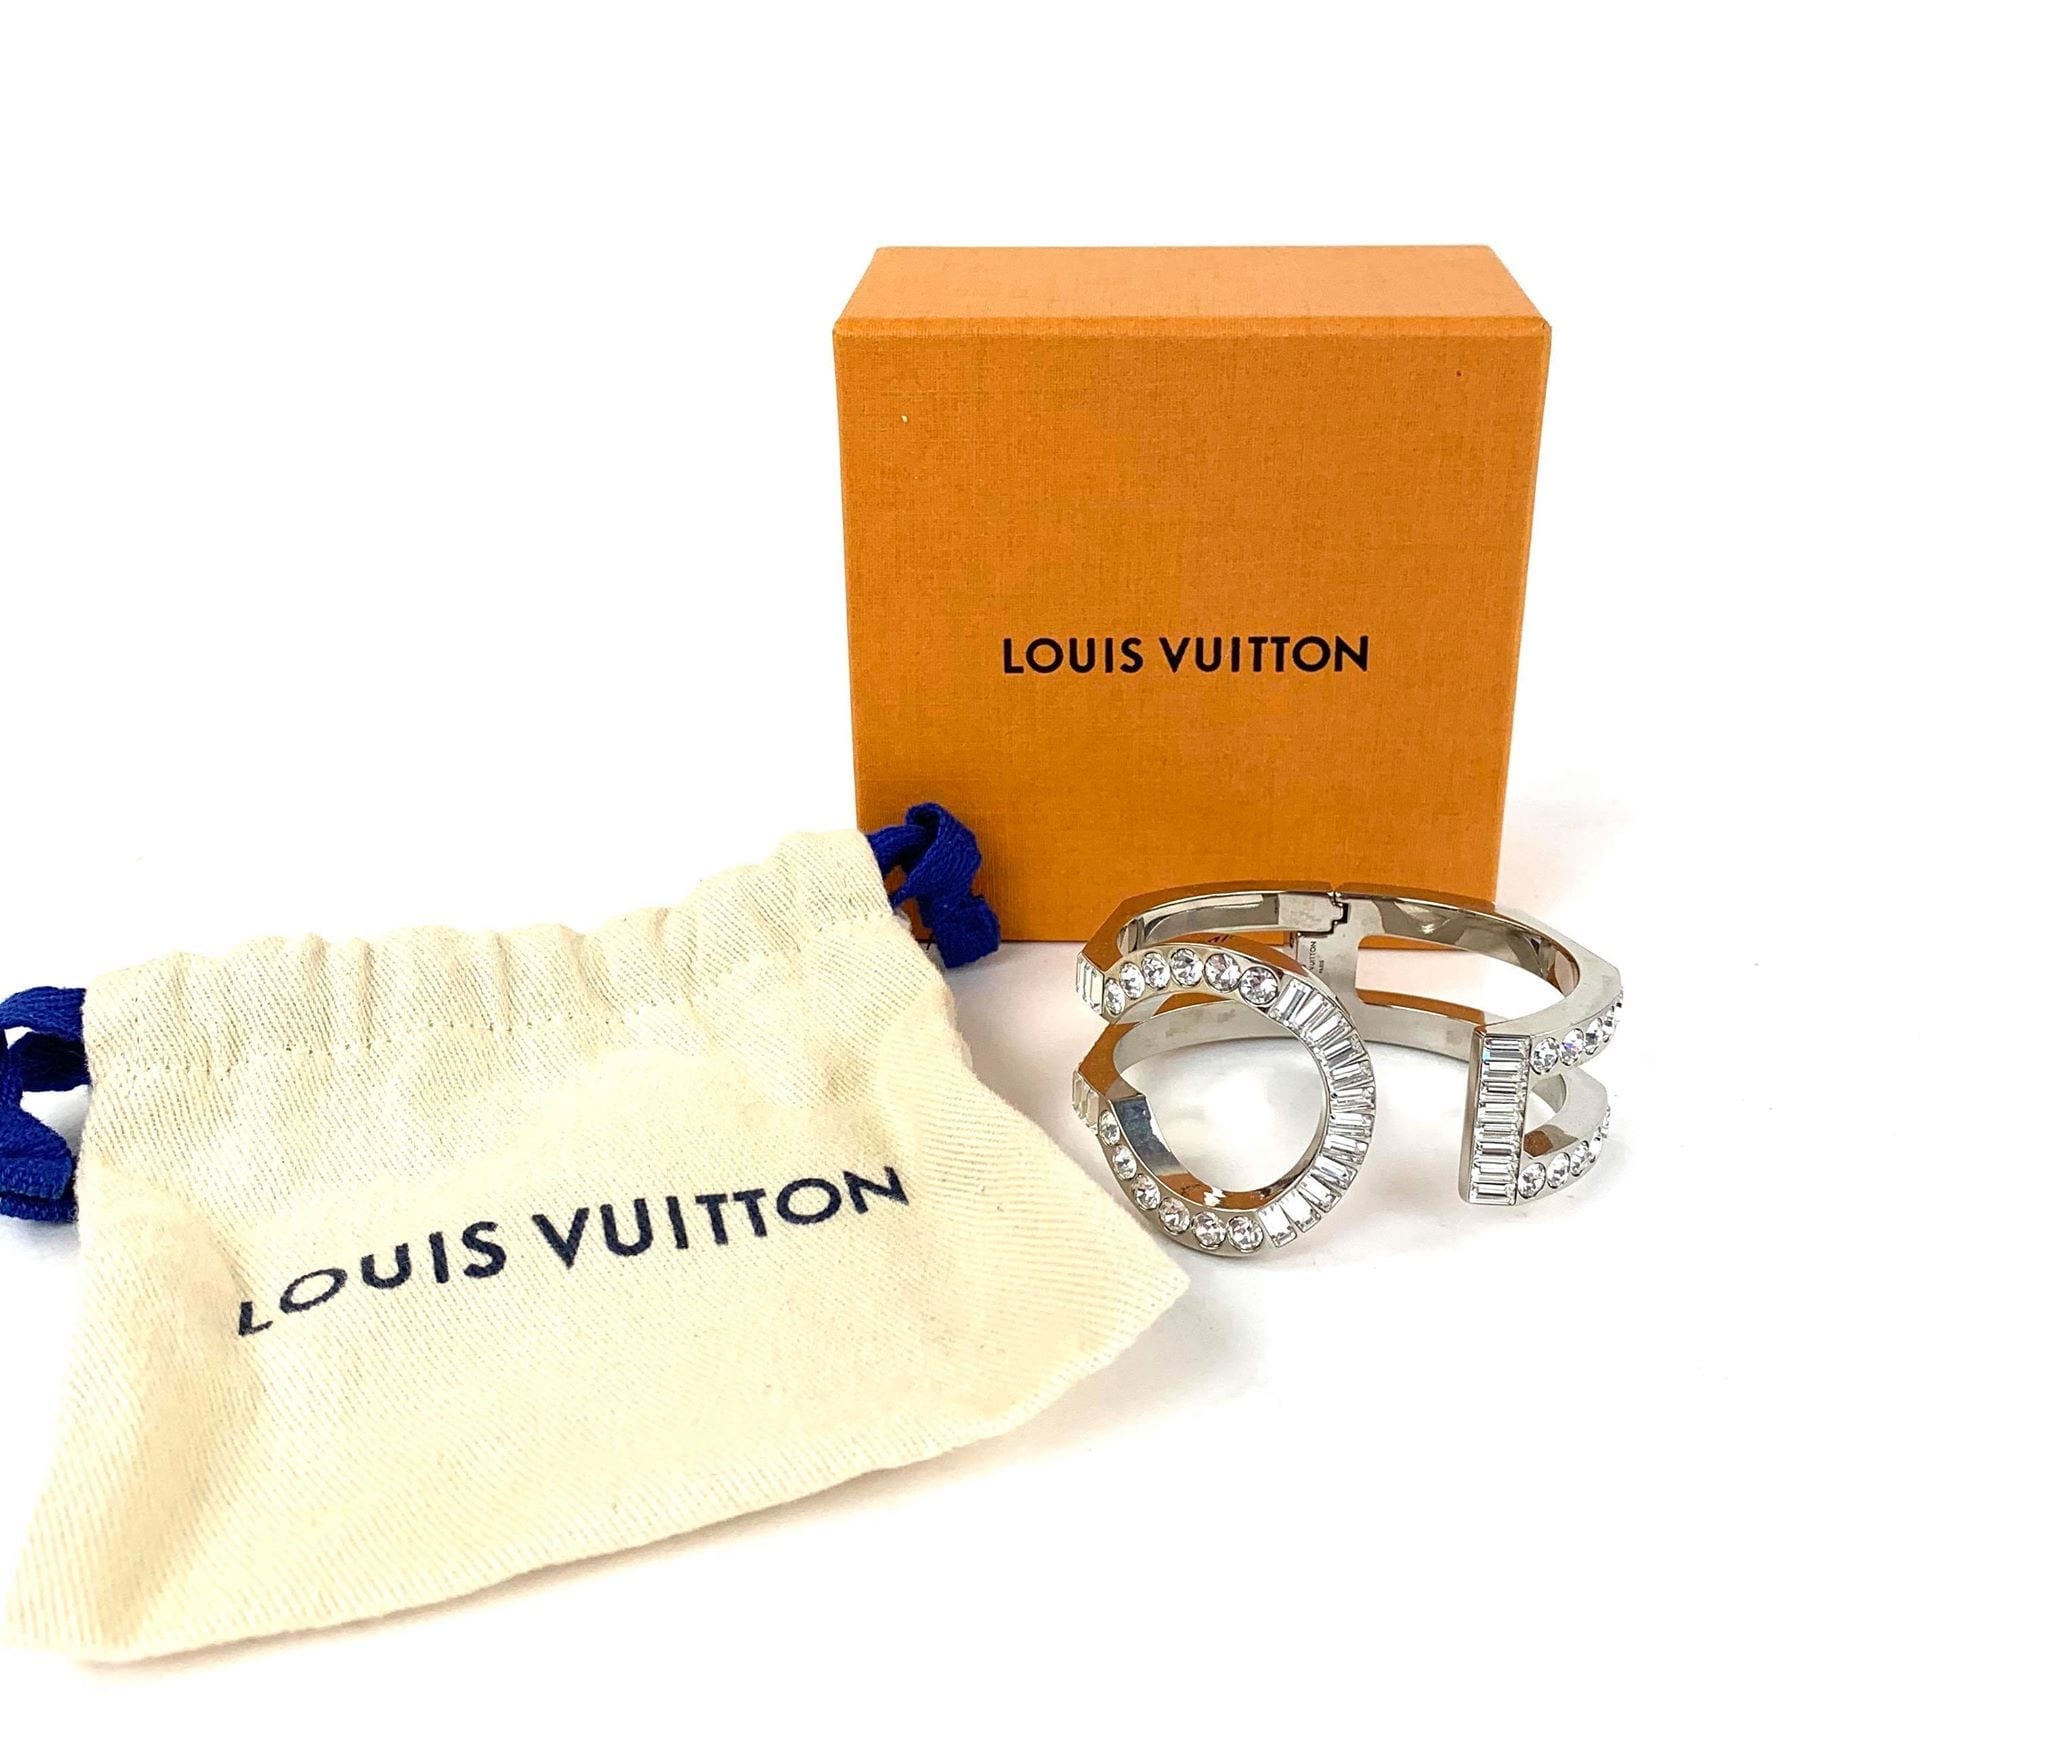 Louis Vuitton crystal wide ring